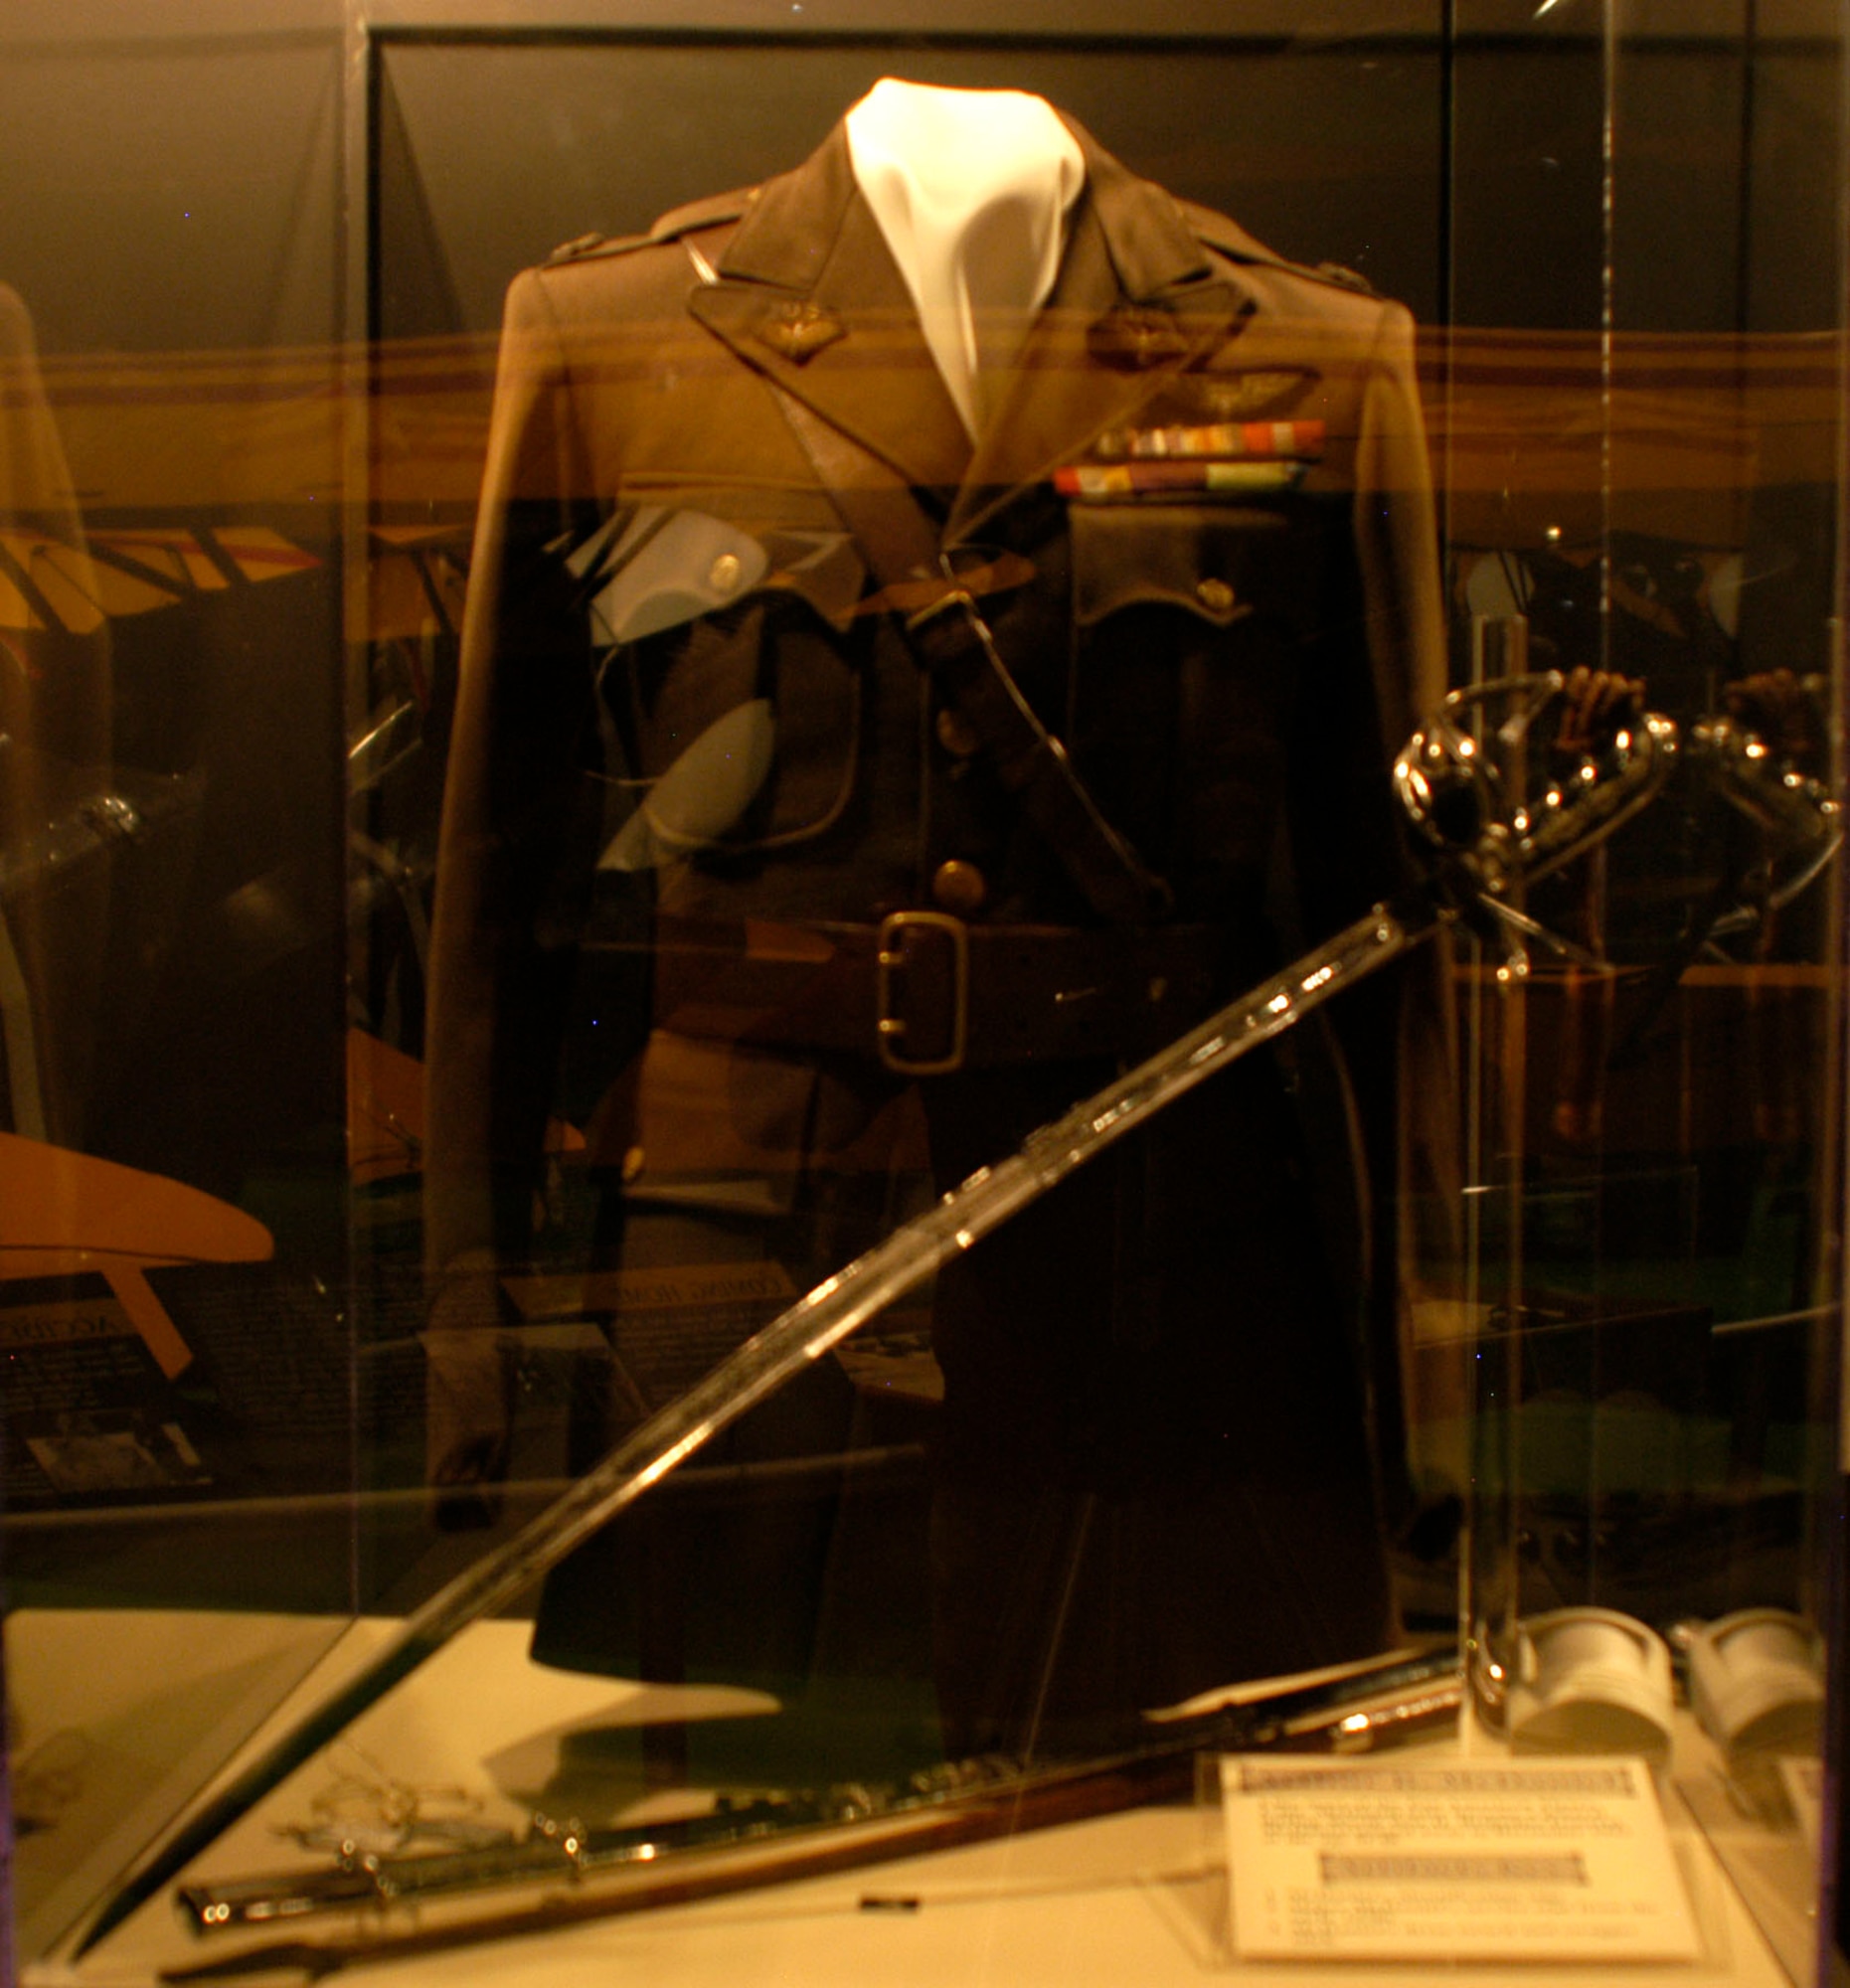 DAYTON, Ohio -- Capt. Arthur B. McDaniel's identification tags, service coat from the early 1930s when he was a major, dress sword and swagger stick on display in the Early Years Gallery at the National Museum of the U.S. Air Force. Like most of the Pan American Flyers, McDaniel later became a general during World War II. He passed away in December 1943 at the age of 43. (U.S. Air Force photo)